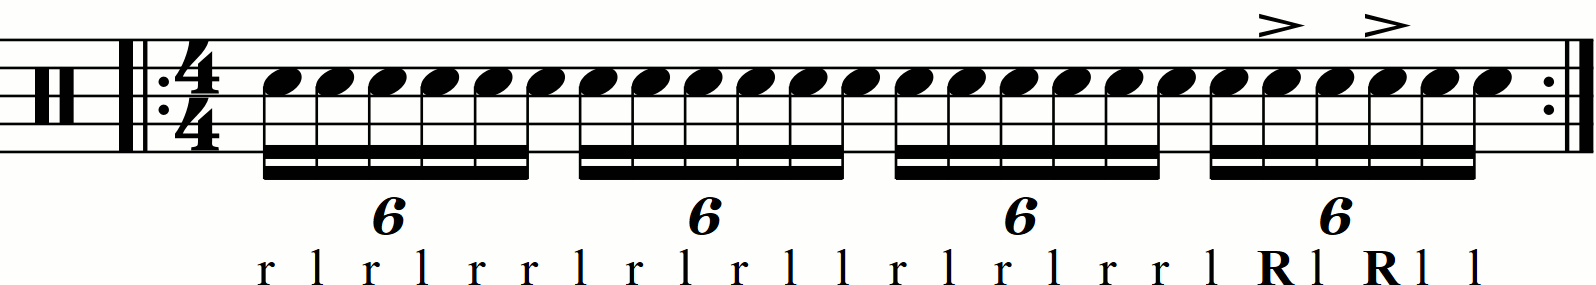 Accenting right hands in a double paradiddle